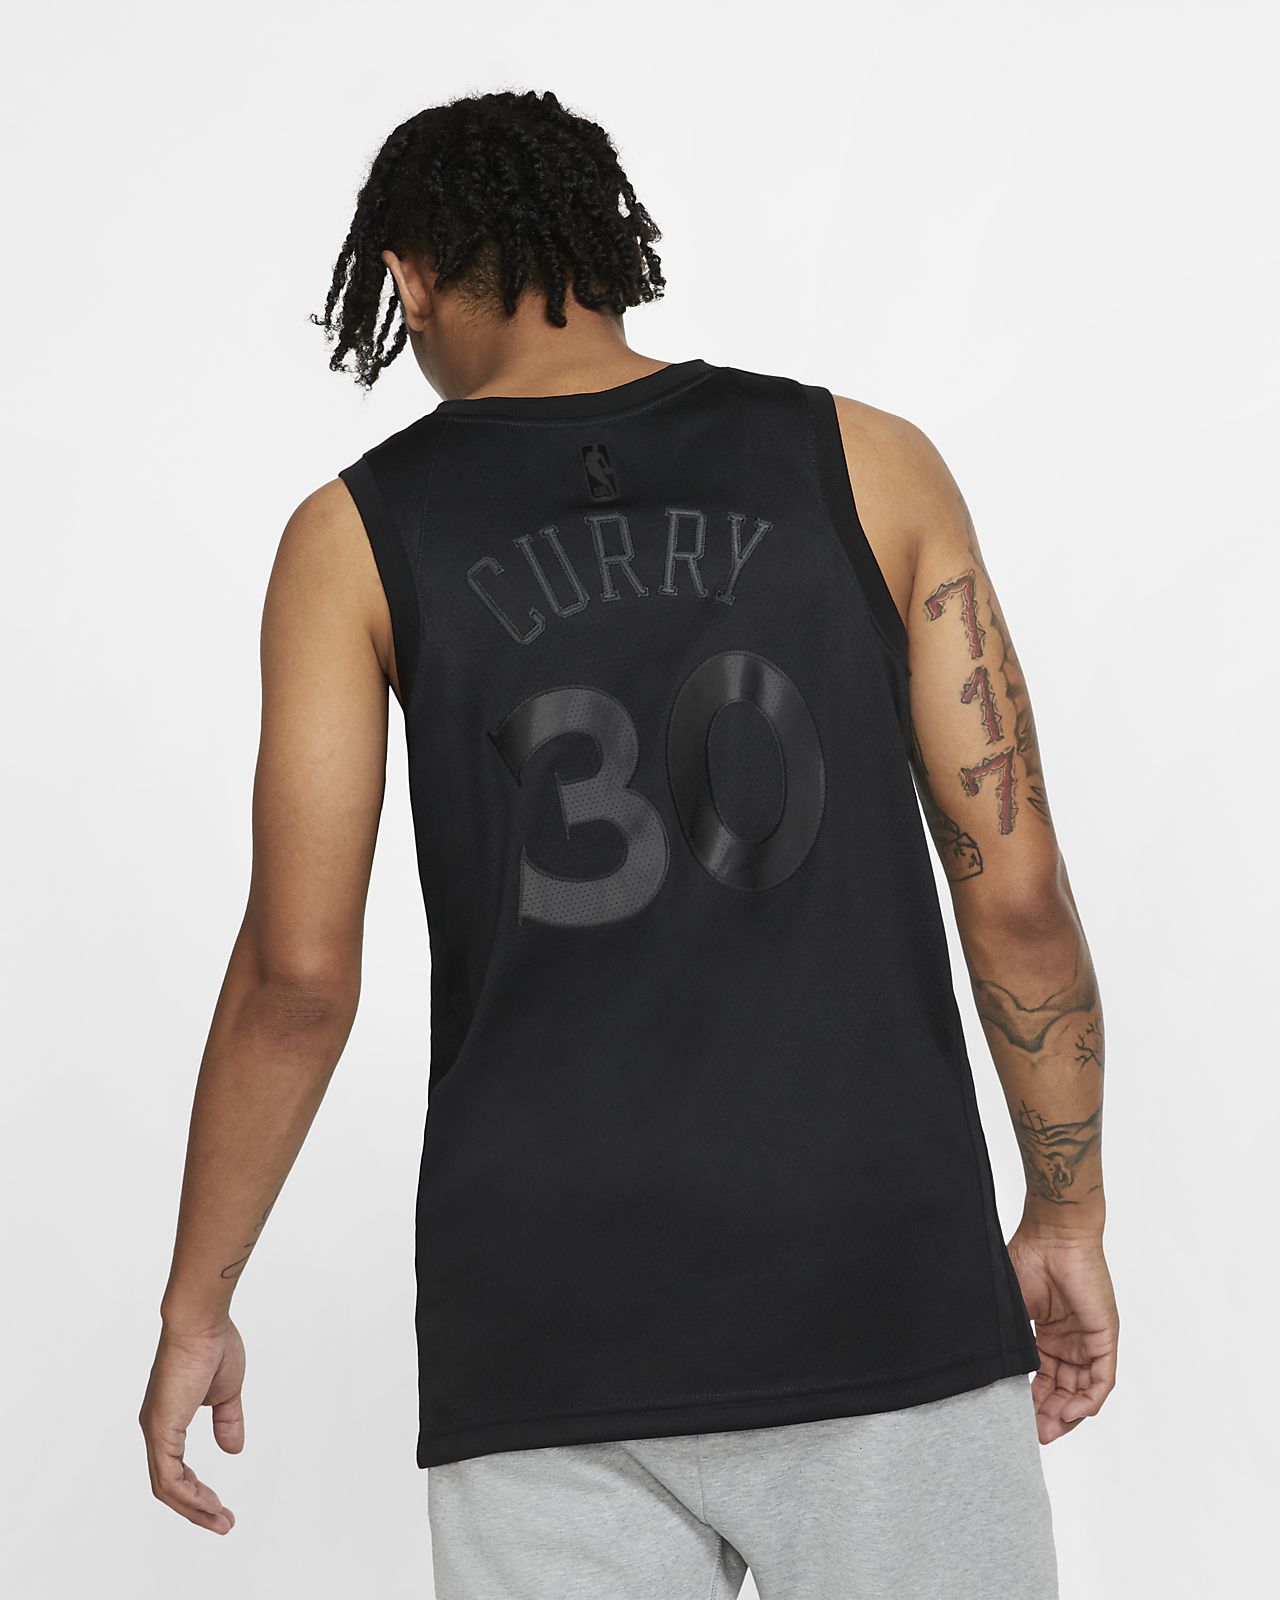 stephen curry limited edition jersey